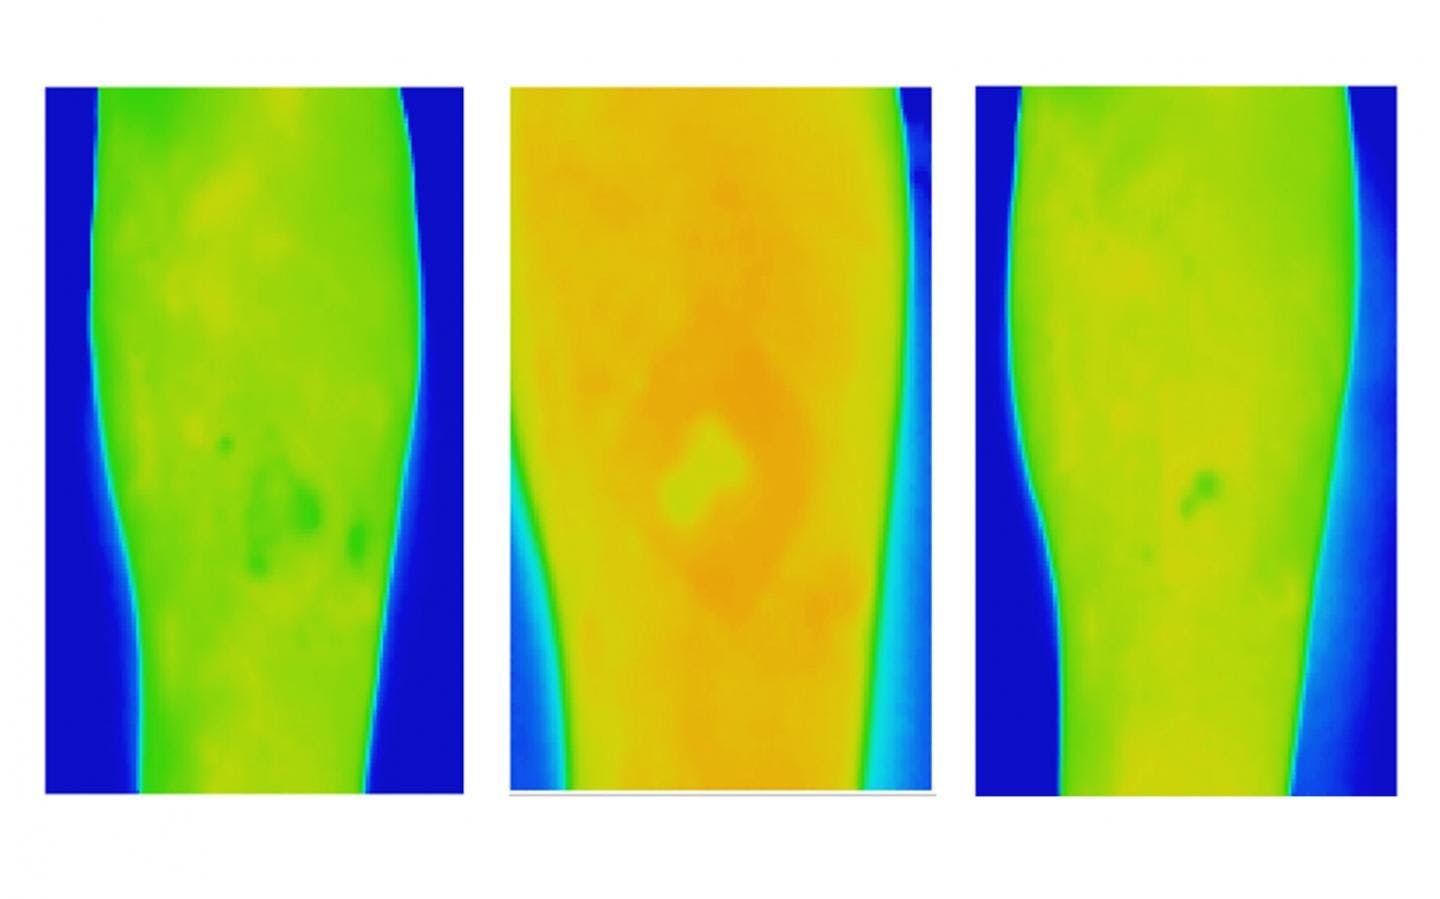 Thermal images of a venous leg ulcer showing healthy healing progress over three weeks.

CREDIT: RMIT University